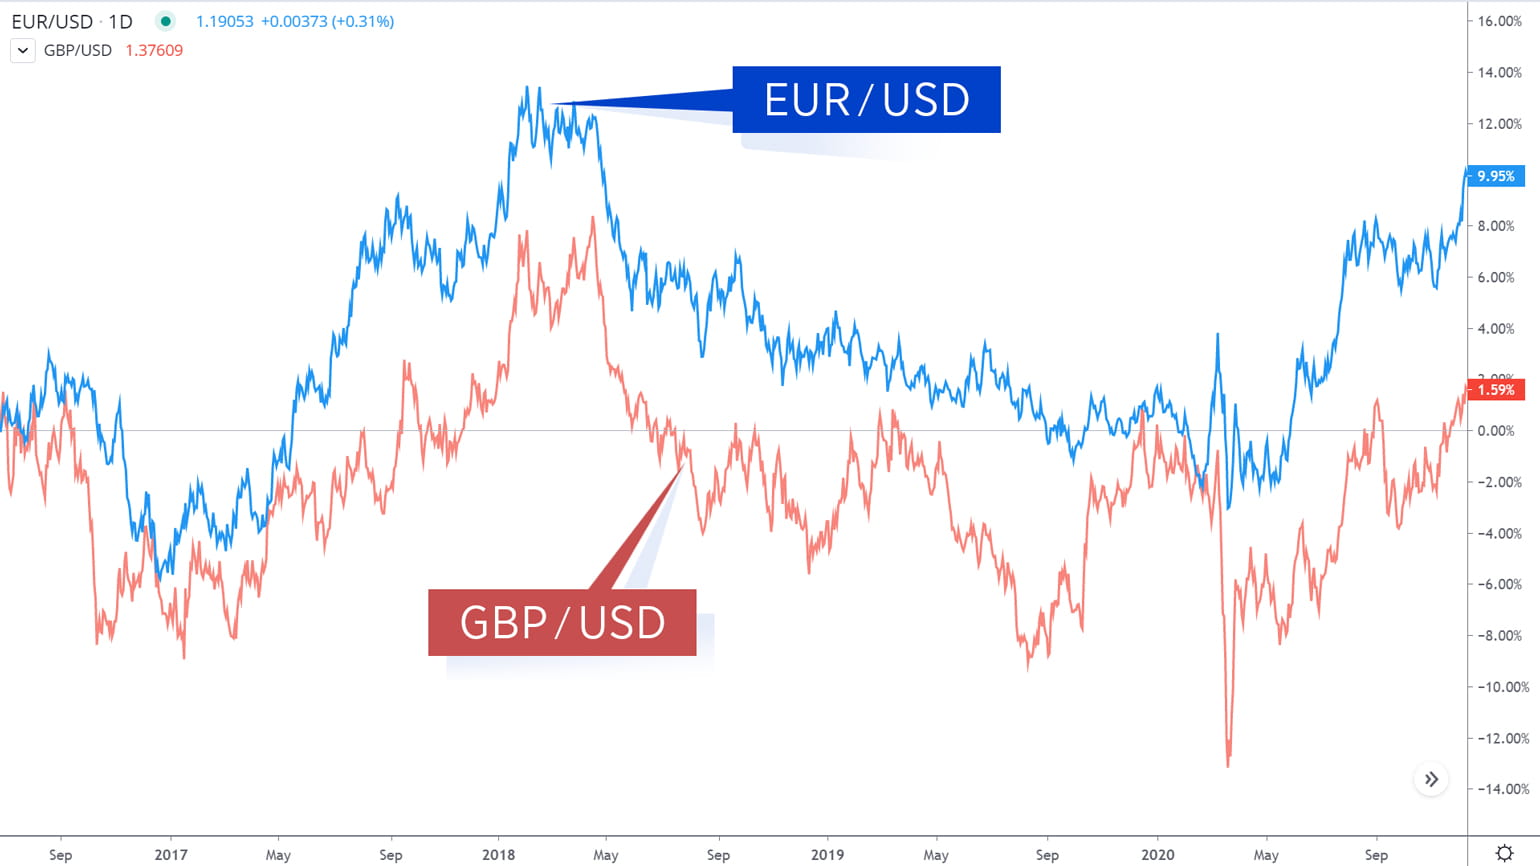 EUR/USD and GBP/USD correlation